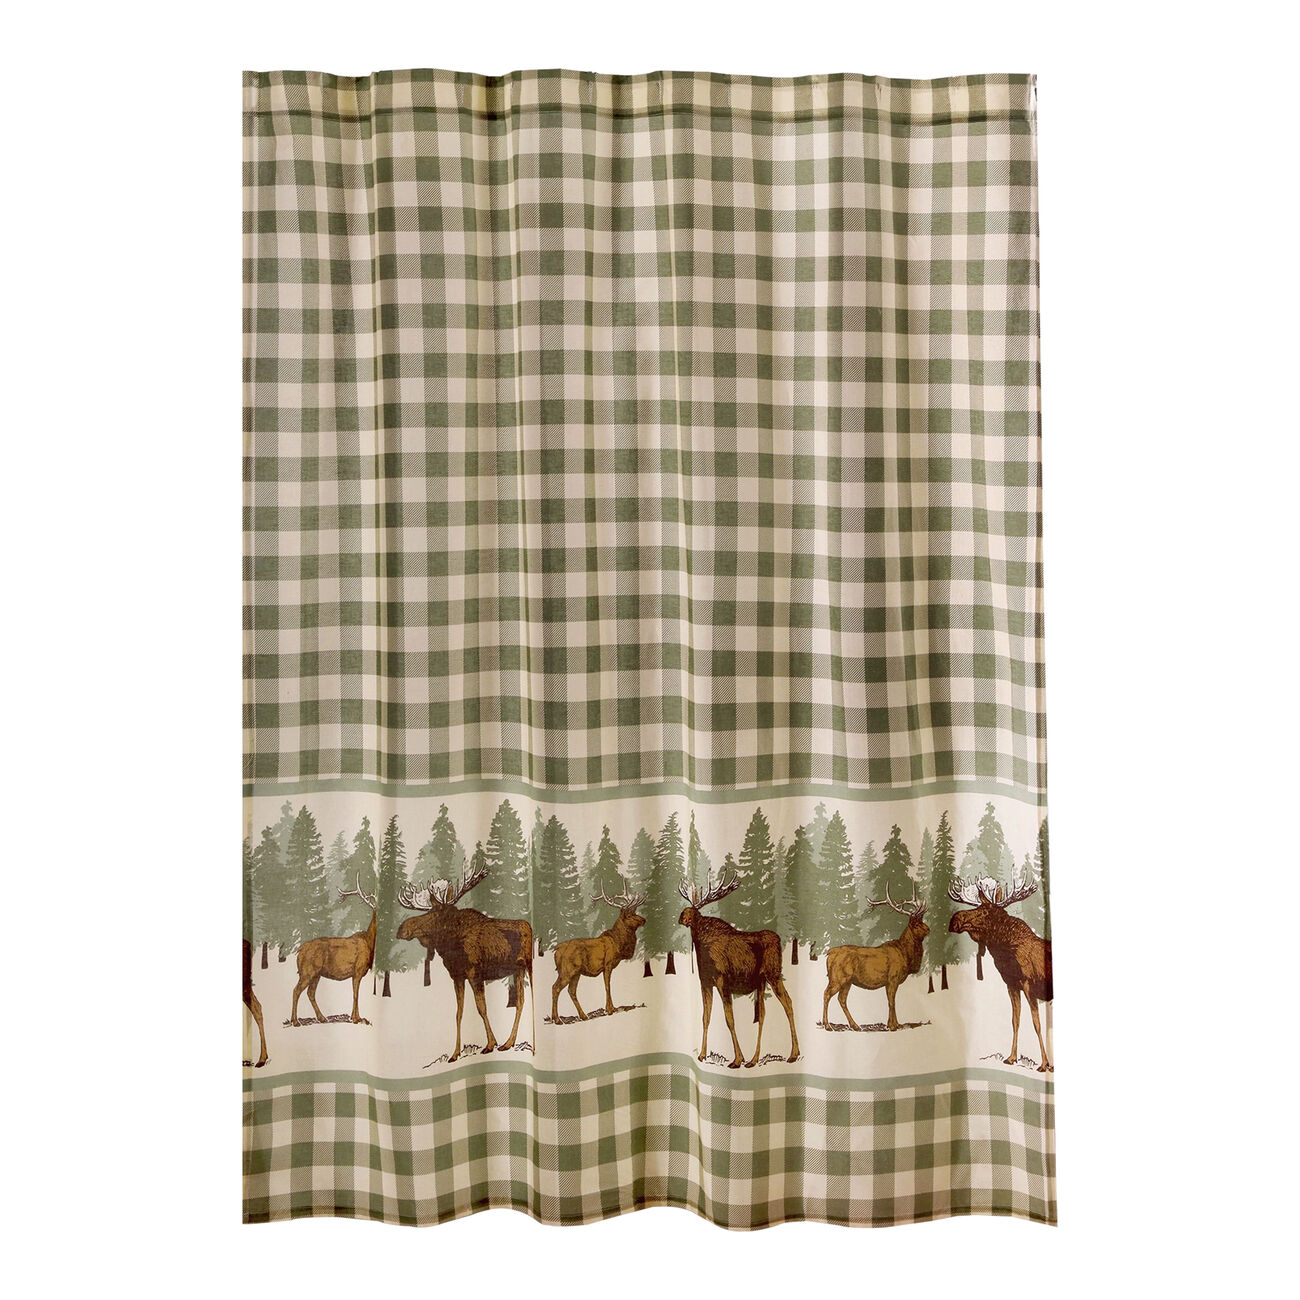 Fabric Shower Curtain with Plaid and Animal Print, Green and Brown - BM223376